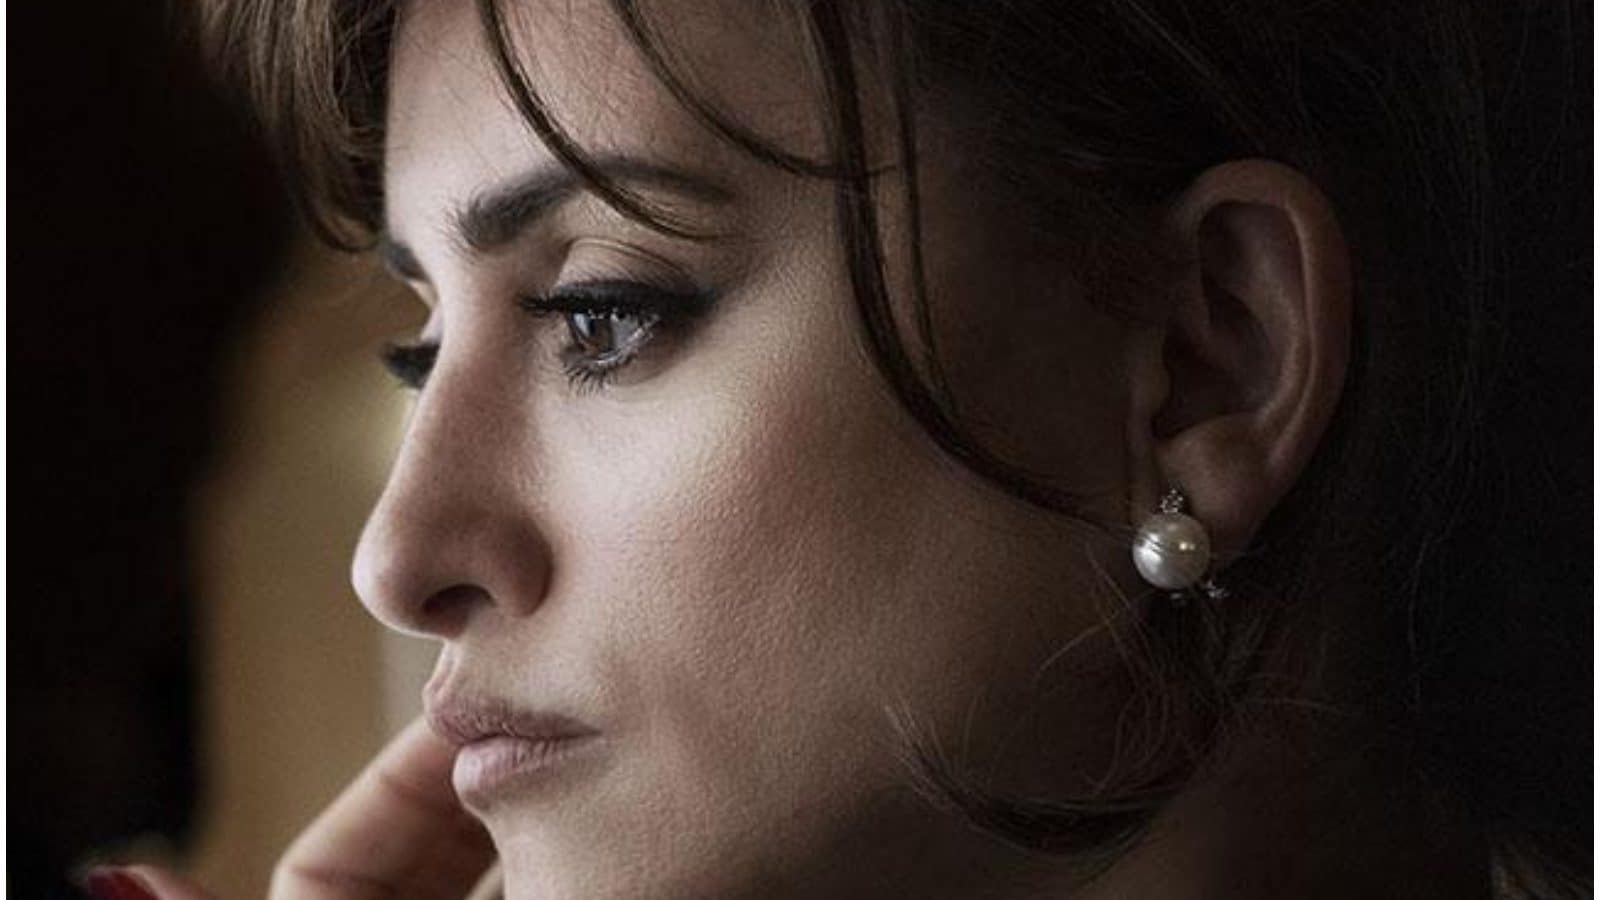 At Venice Film Festival, Immensity, Headlined by Penelope Cruz, is a Haunting Look at Domestic Abuse